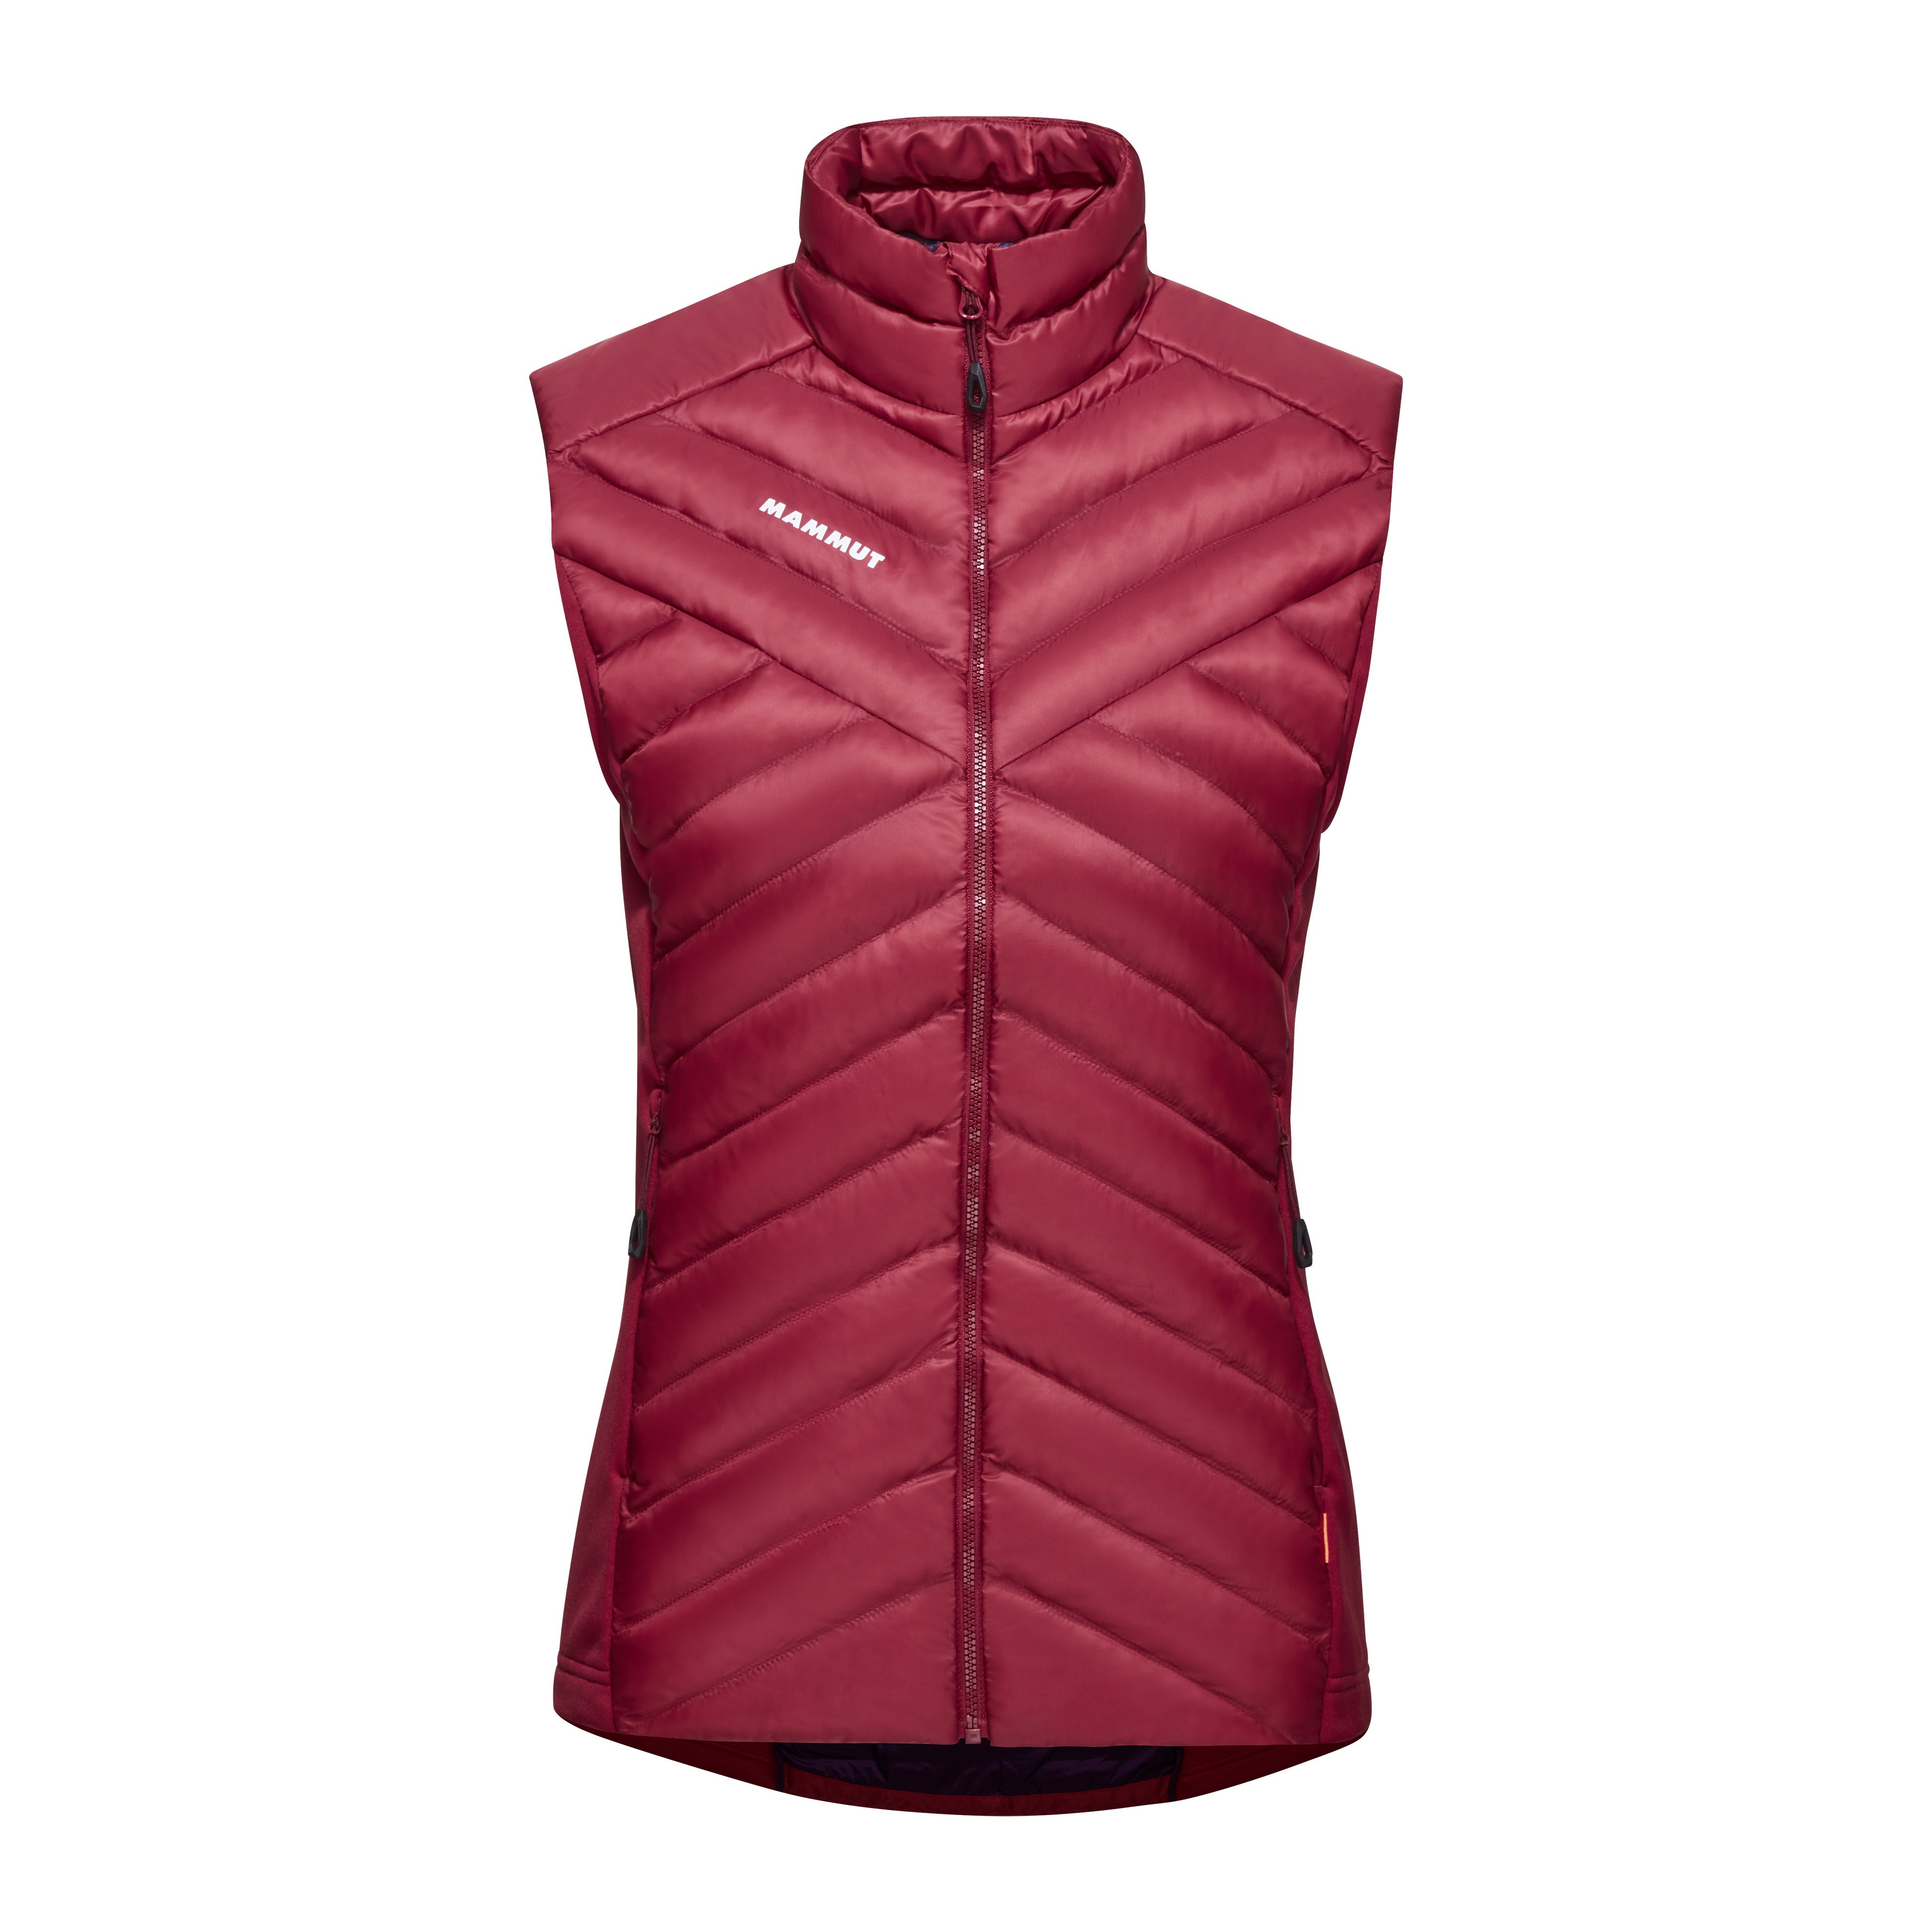 Albula IN Hybrid Vest Women - blood red, S product image